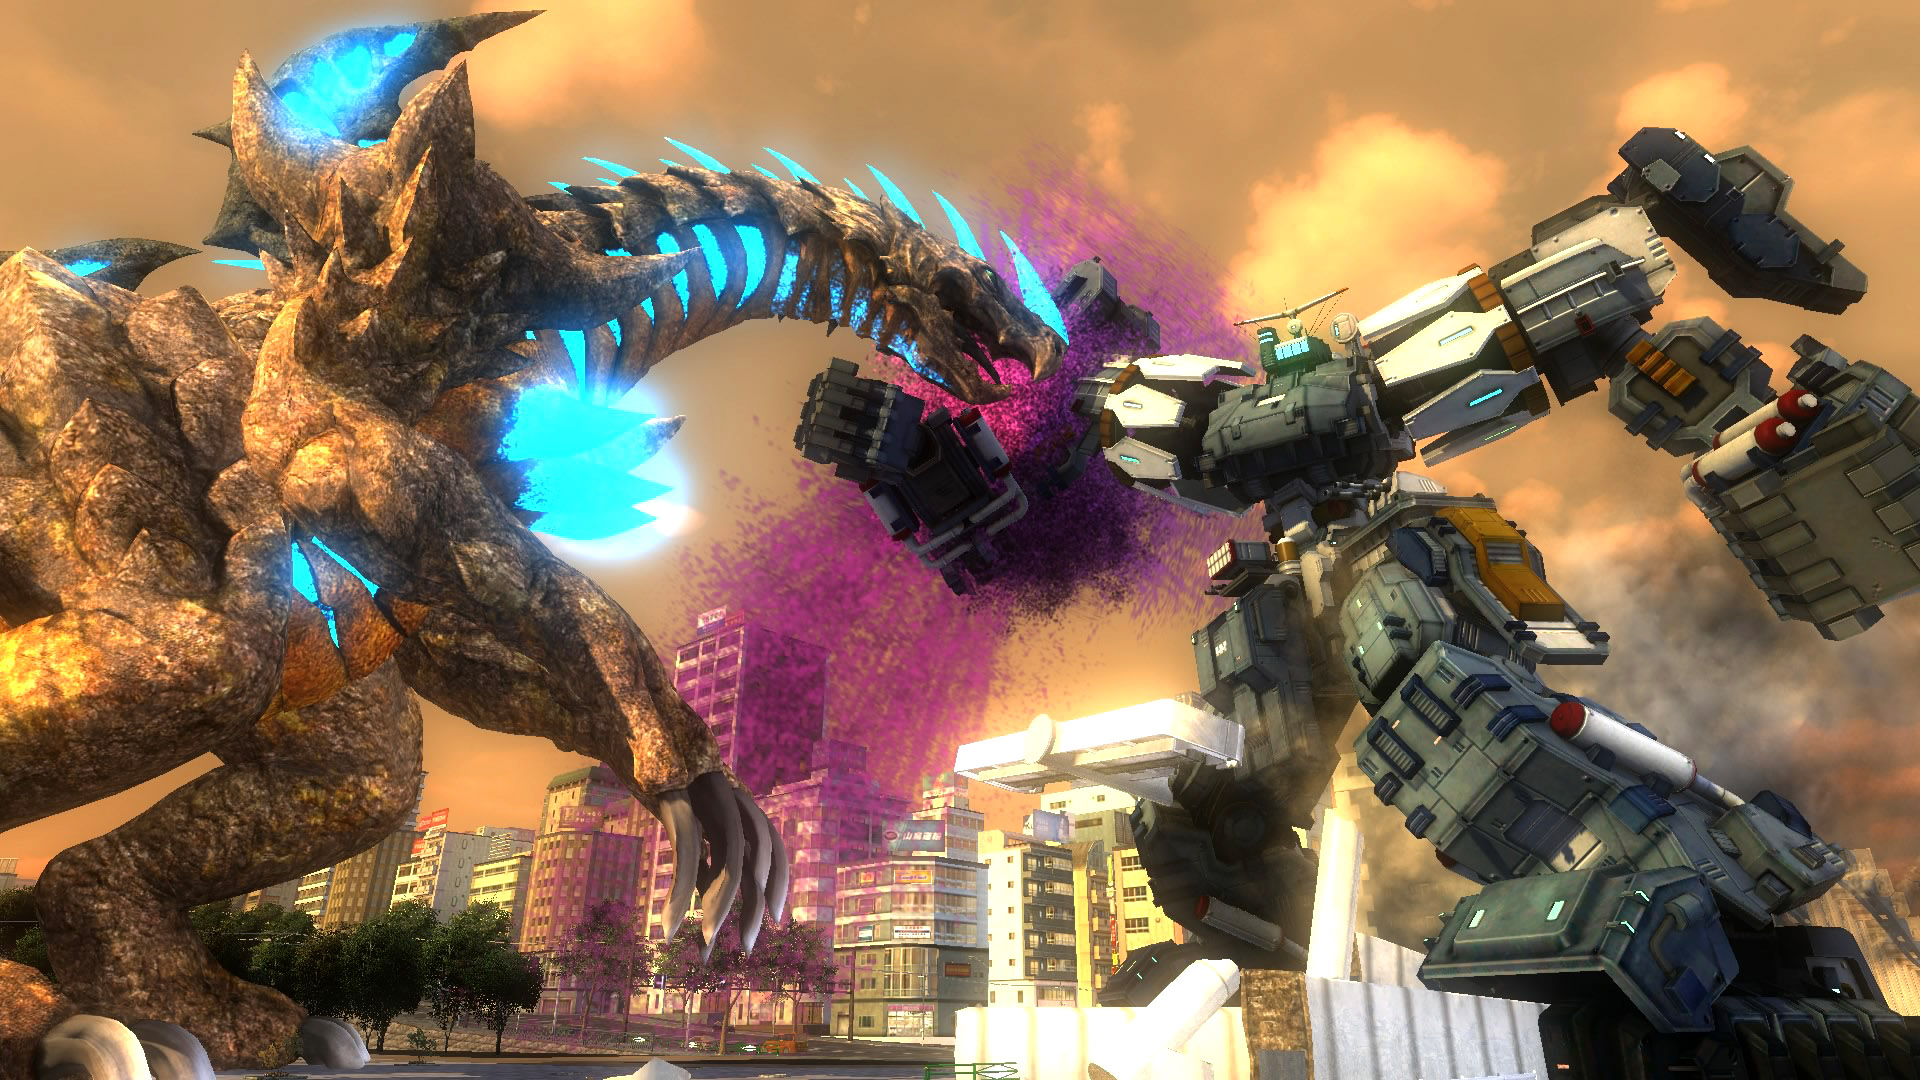 Earth Defense Force 4.1 launches for Switch in December